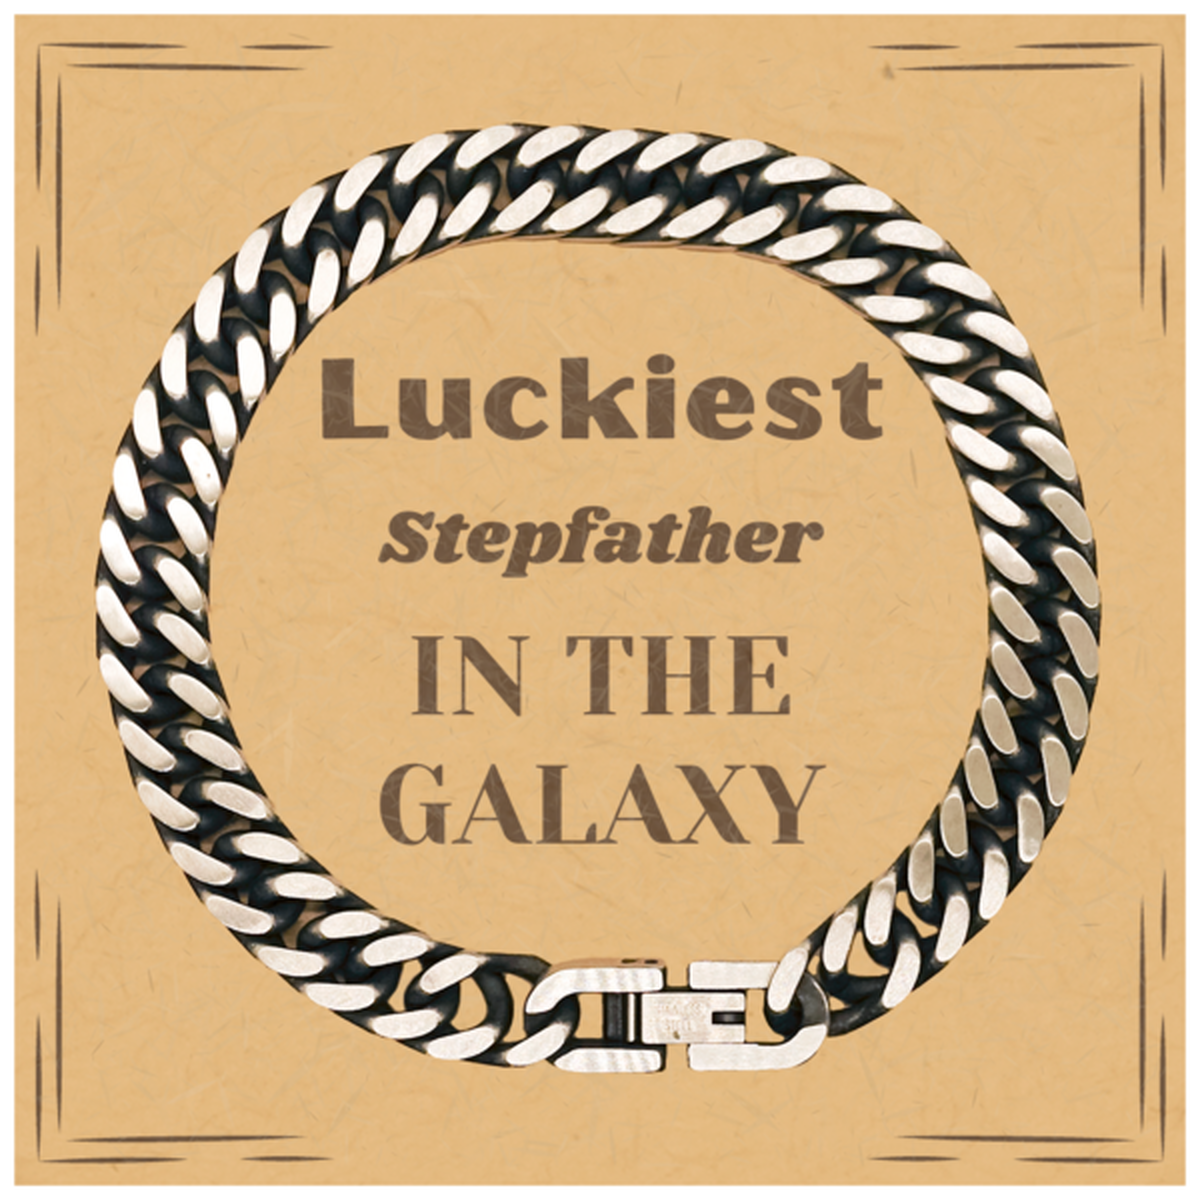 Luckiest Stepfather in the Galaxy, To My Stepfather Message Card Gifts, Christmas Stepfather Cuban Link Chain Bracelet Gifts, X-mas Birthday Unique Gifts For Stepfather Men Women